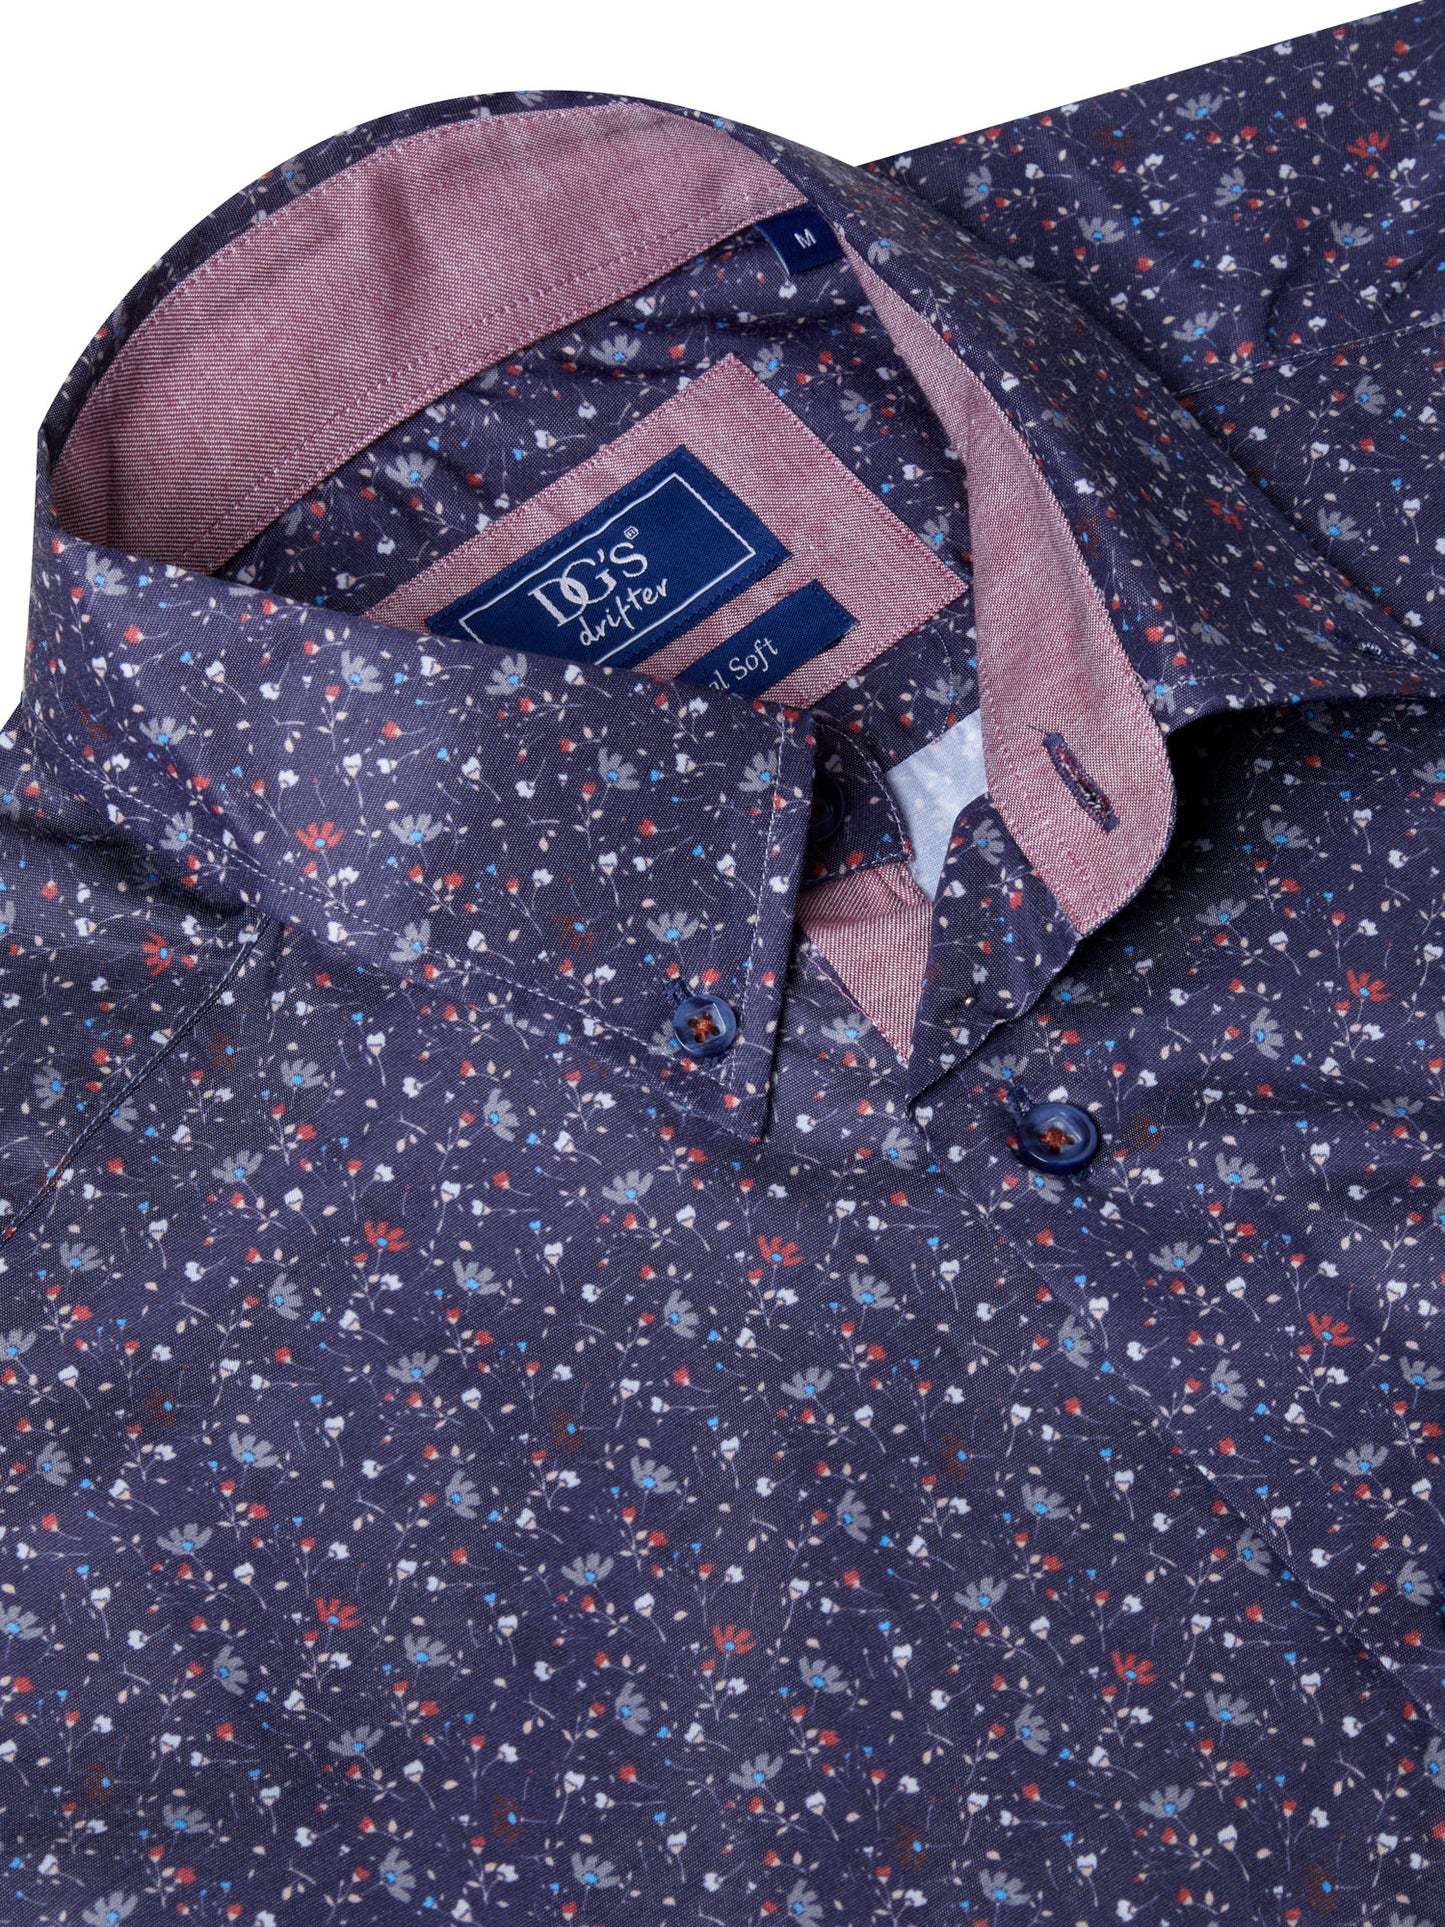 Pure Cotton Button-Down Long-Sleeve Shirt - Floral Print Navy